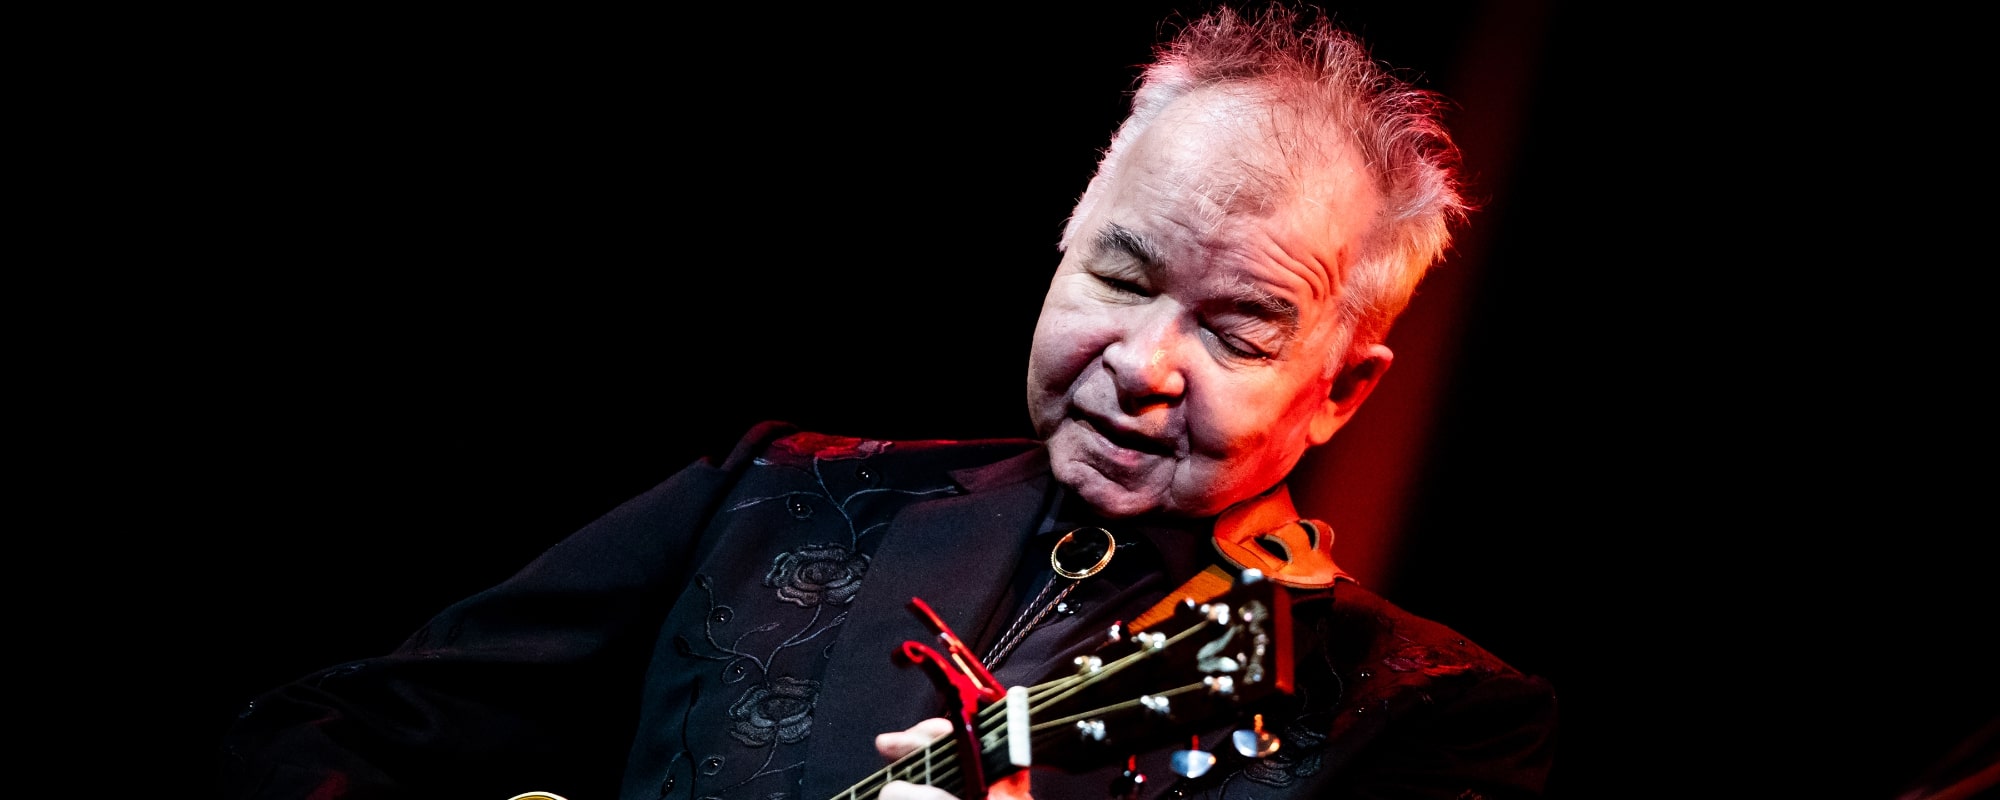 John Prine Died on This Day in 2020, But His Legacy of Joy Lives On